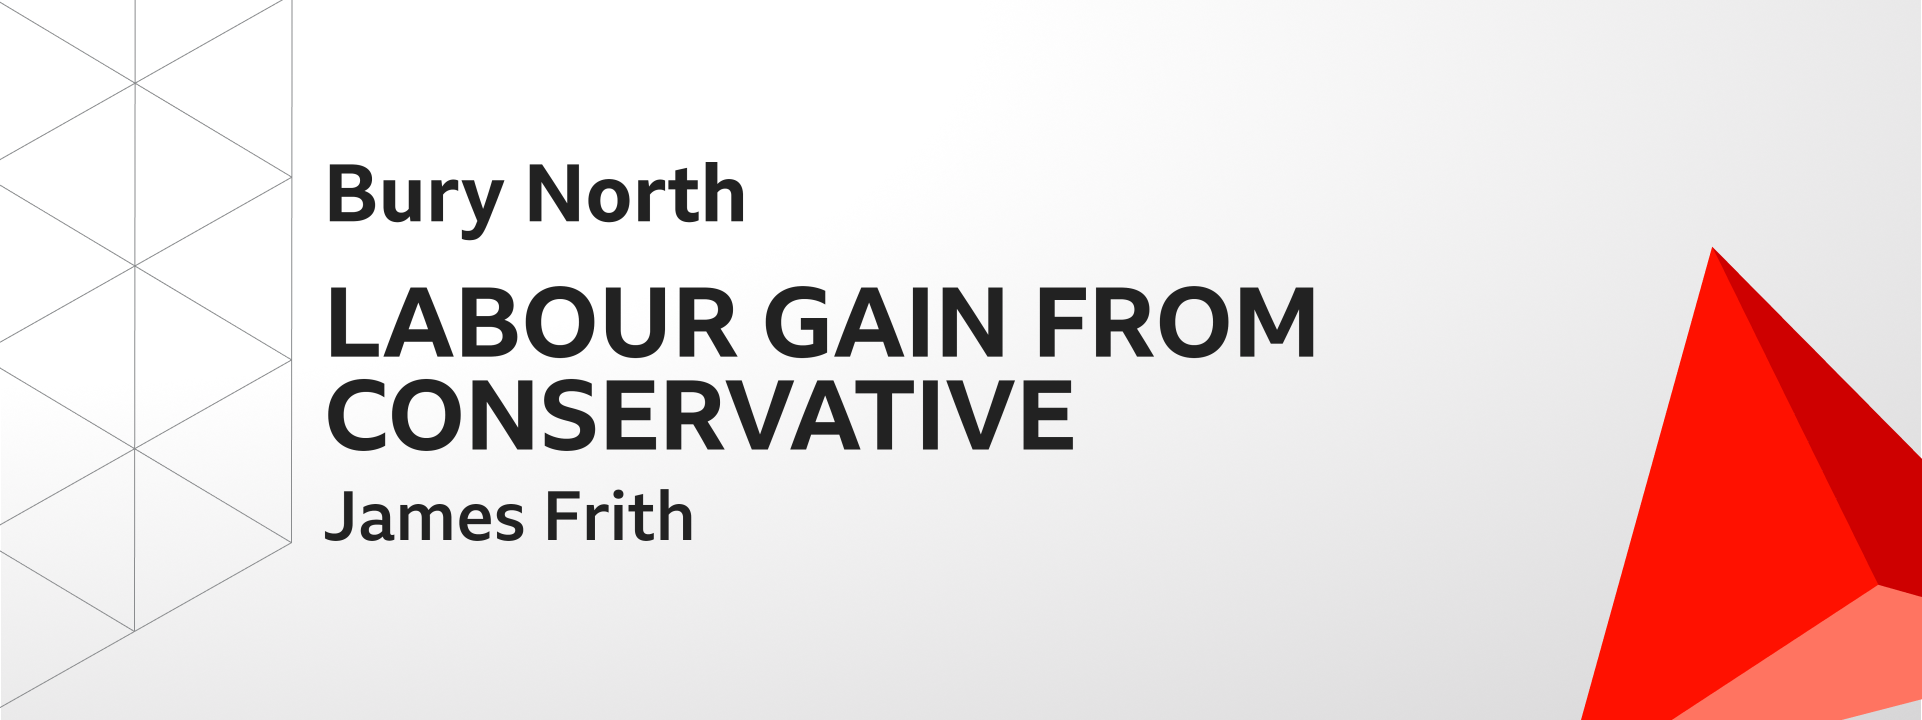 Graphic showing Labour gains Bury North from the Conservatives. The winning candidate was James Frith.